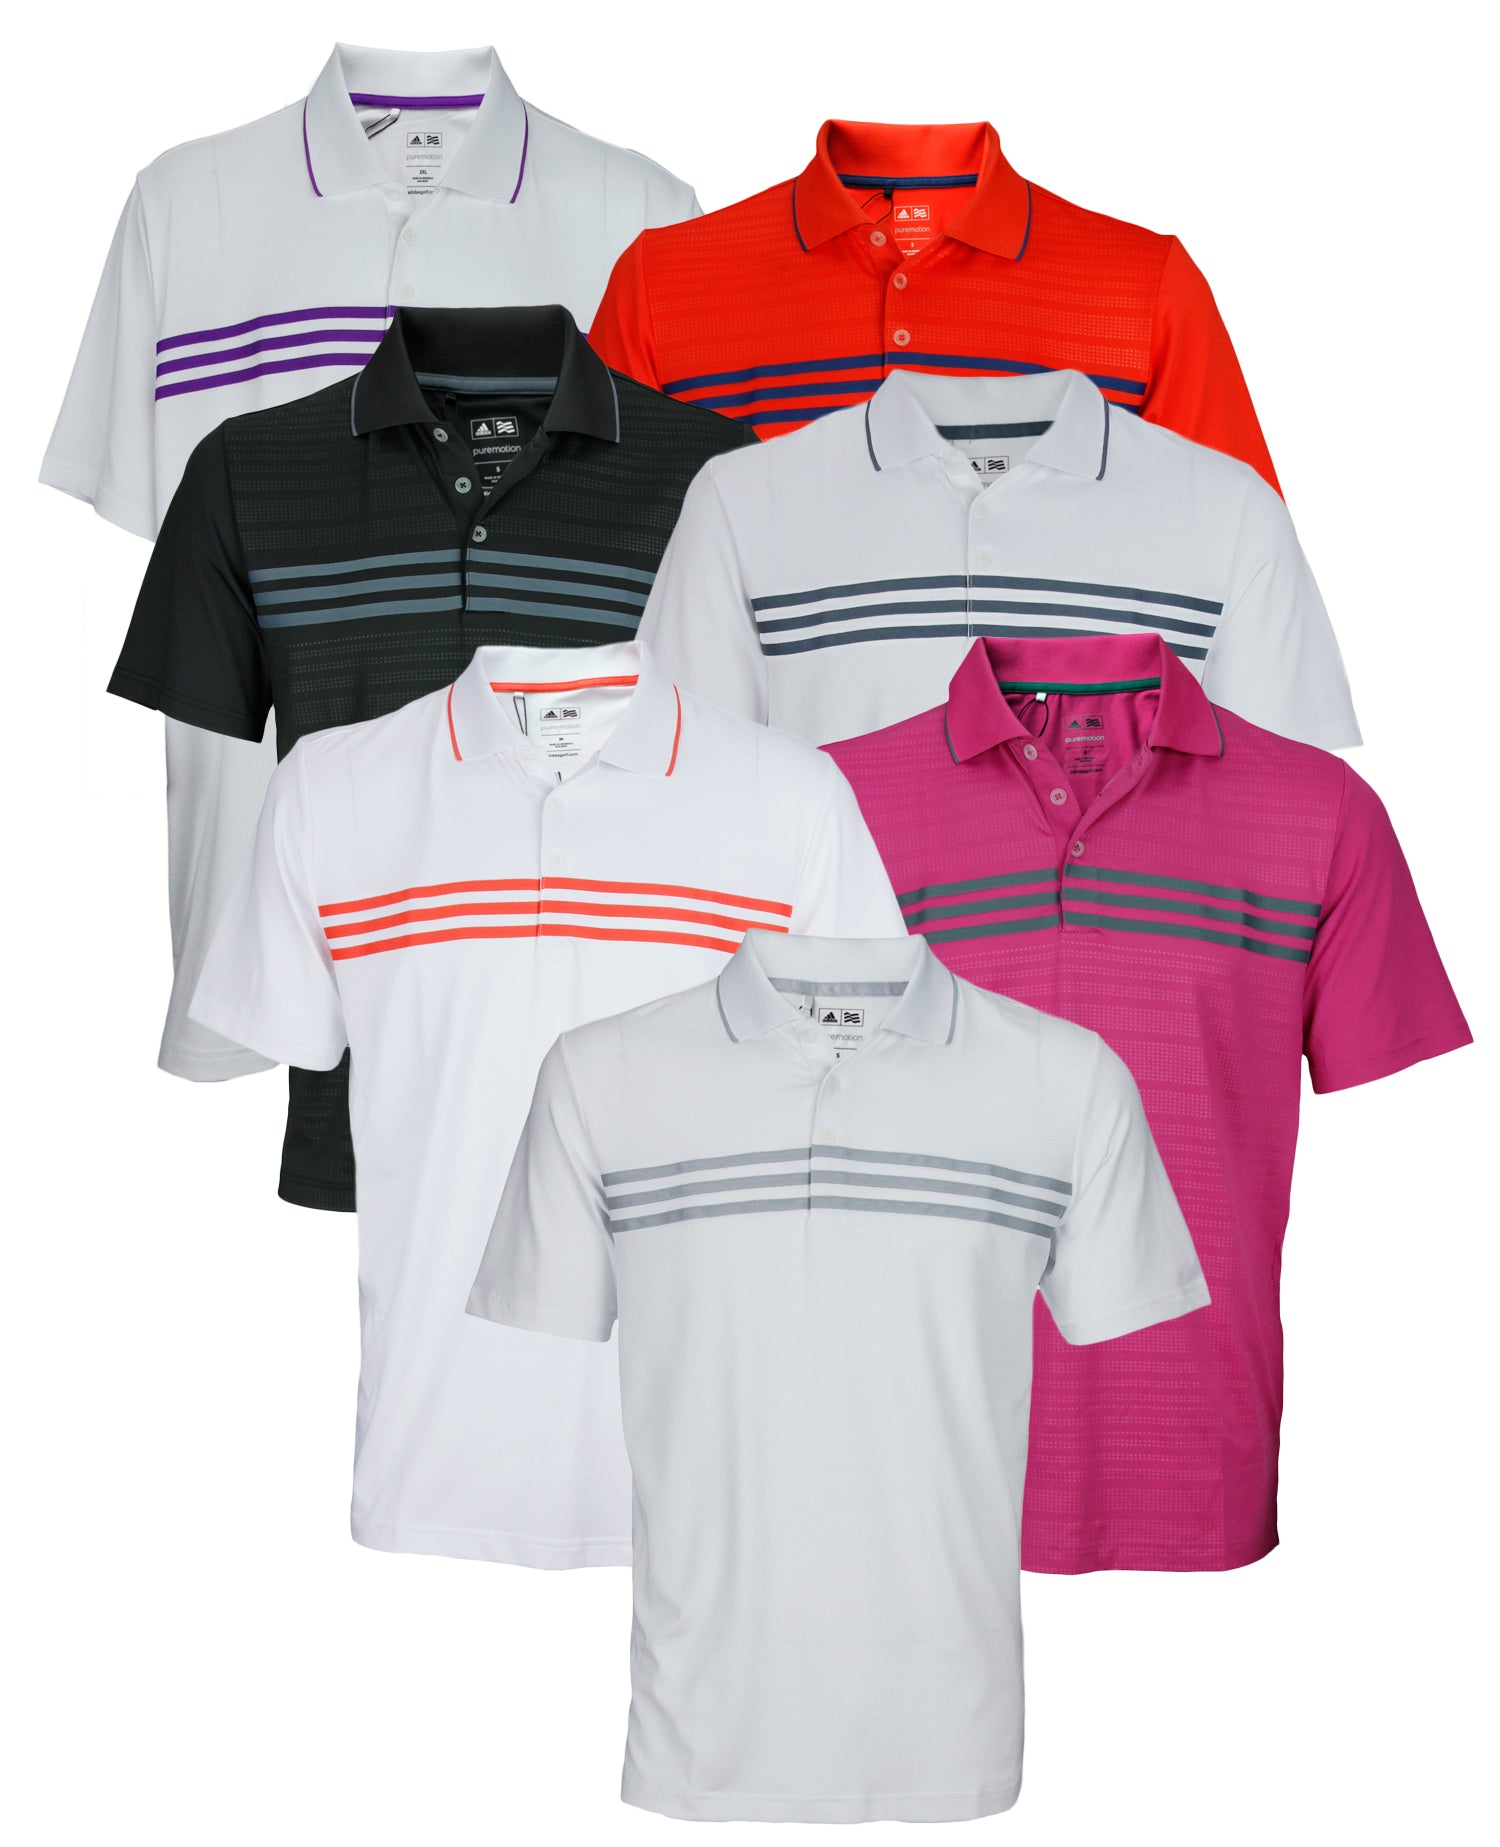 Adidas Golf Men's TaylorMade Puremotion Climacool 3-Stripes Slee Fanletic